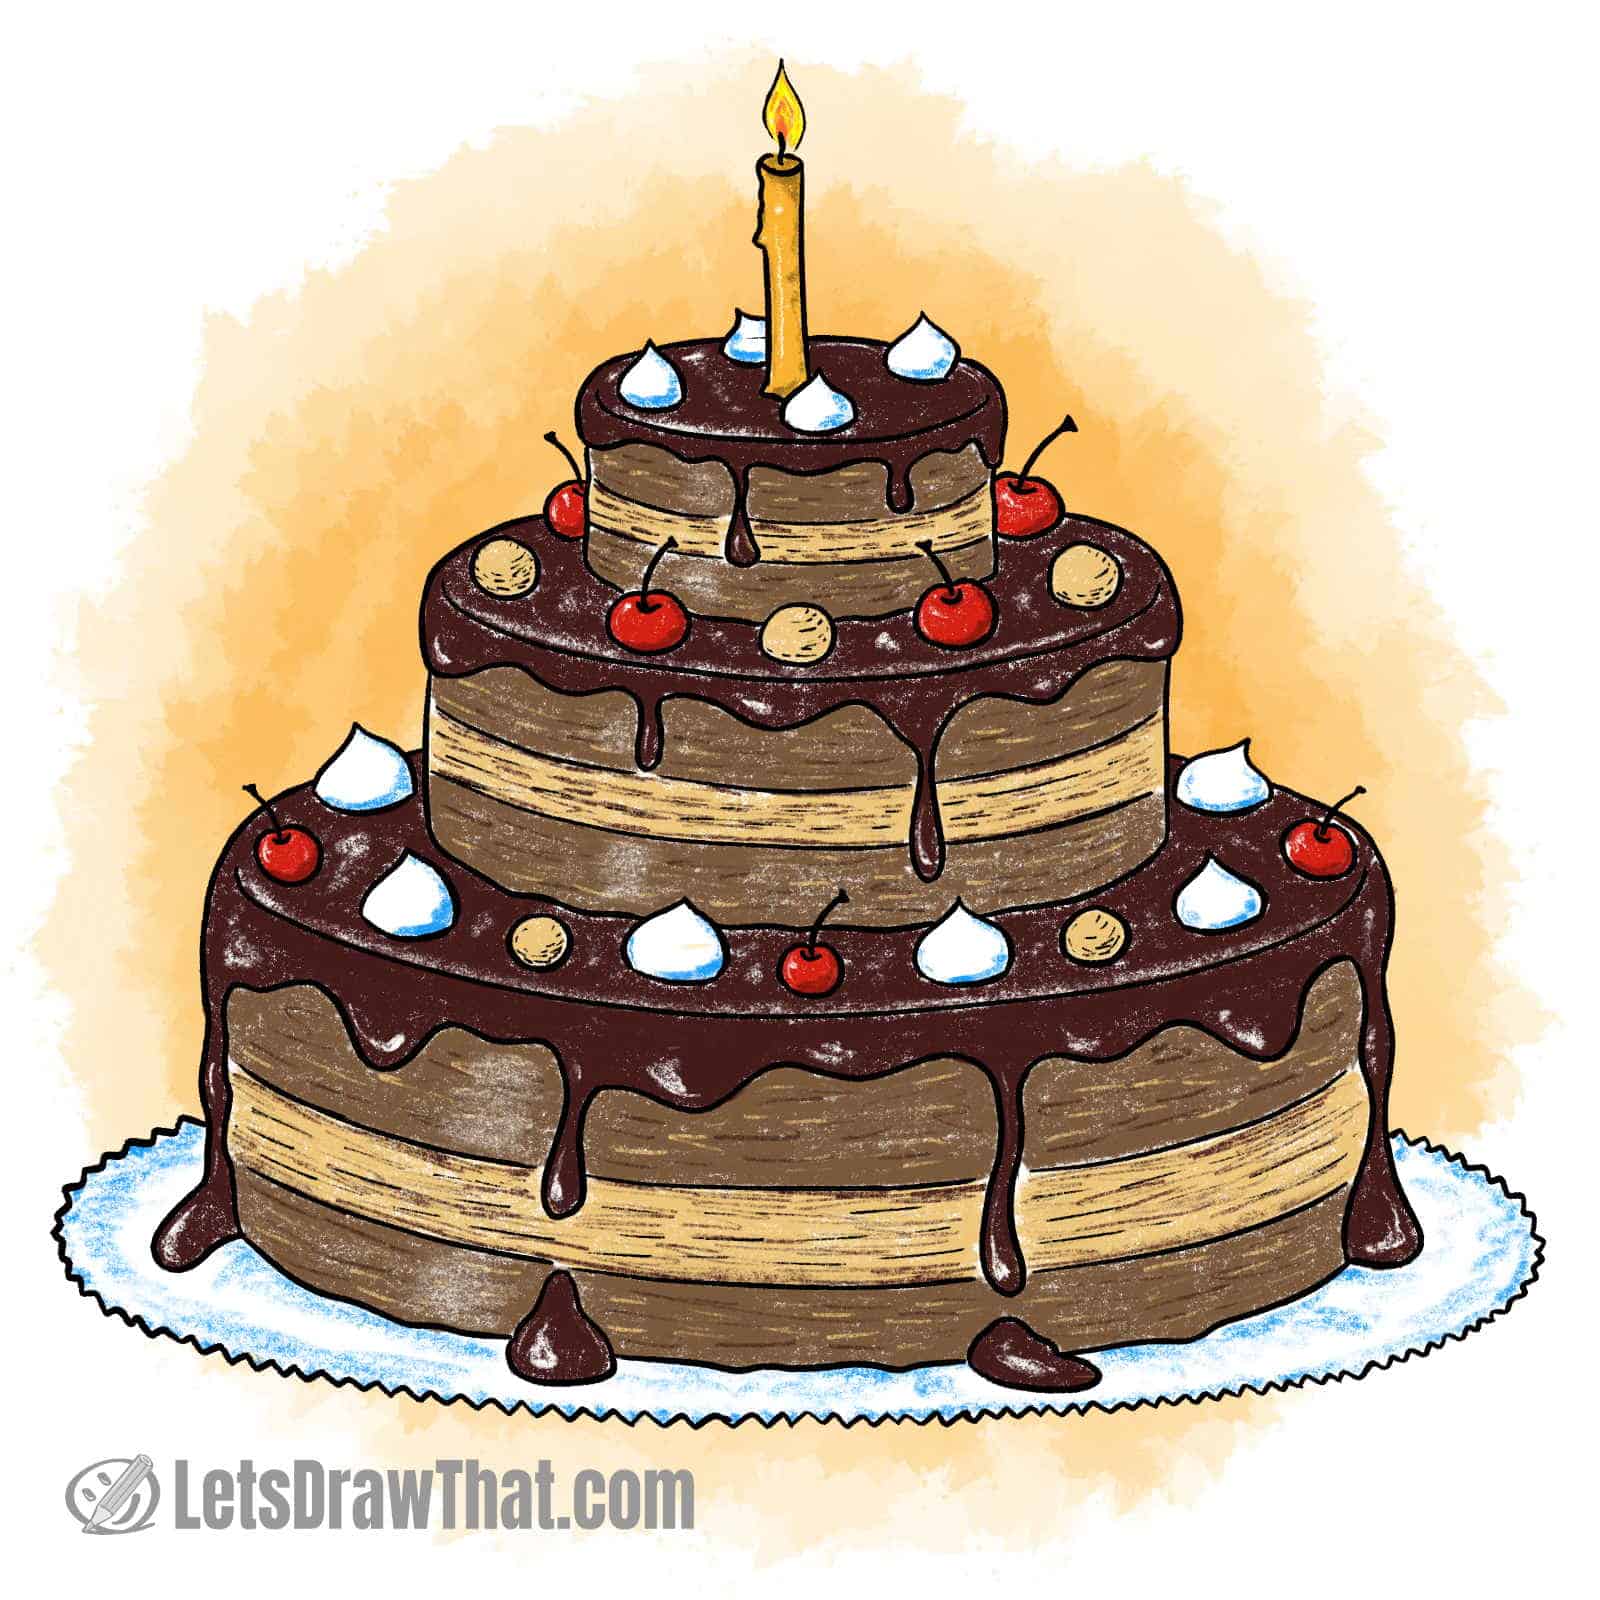 Finished cake drawing colored-in